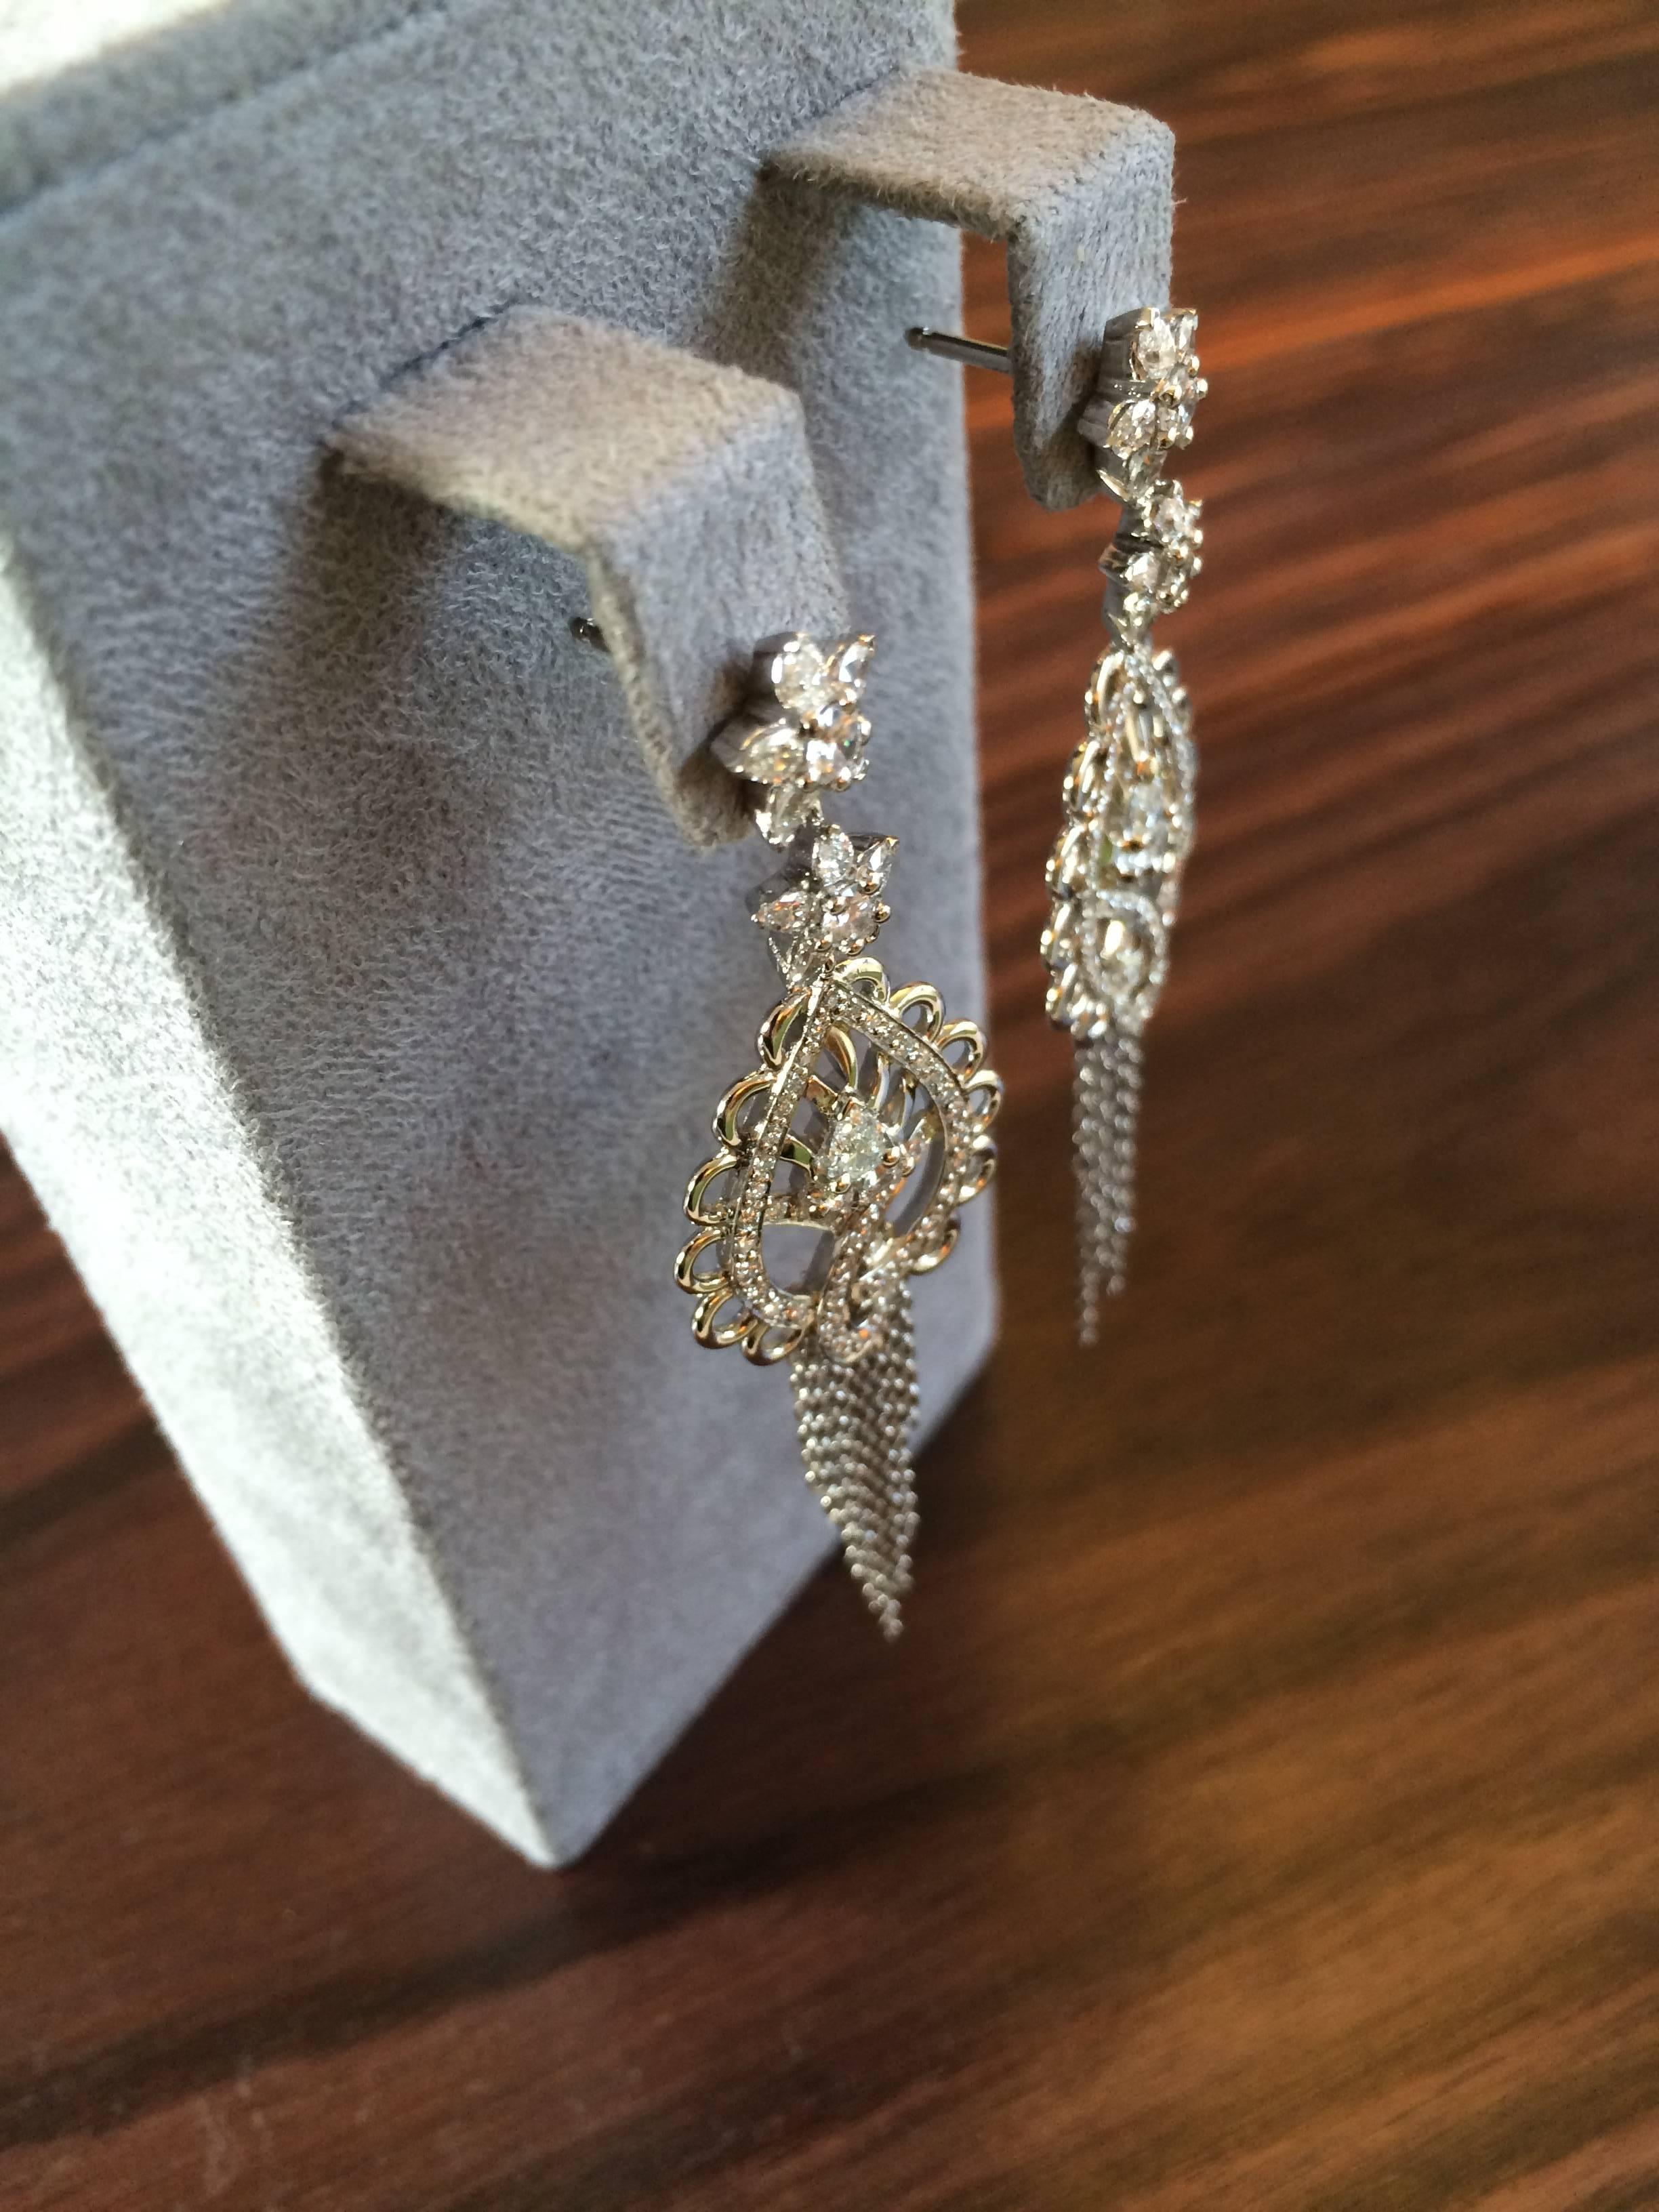 These earrings are hand crafted in platinum and hand set with 2.30ct white diamonds, e/f colour and Vs clarity. 

Diameter: 2cm
Length at the longest point: 7.2cm

These earrings have been crafted in our London workshop and are part of the Ana de